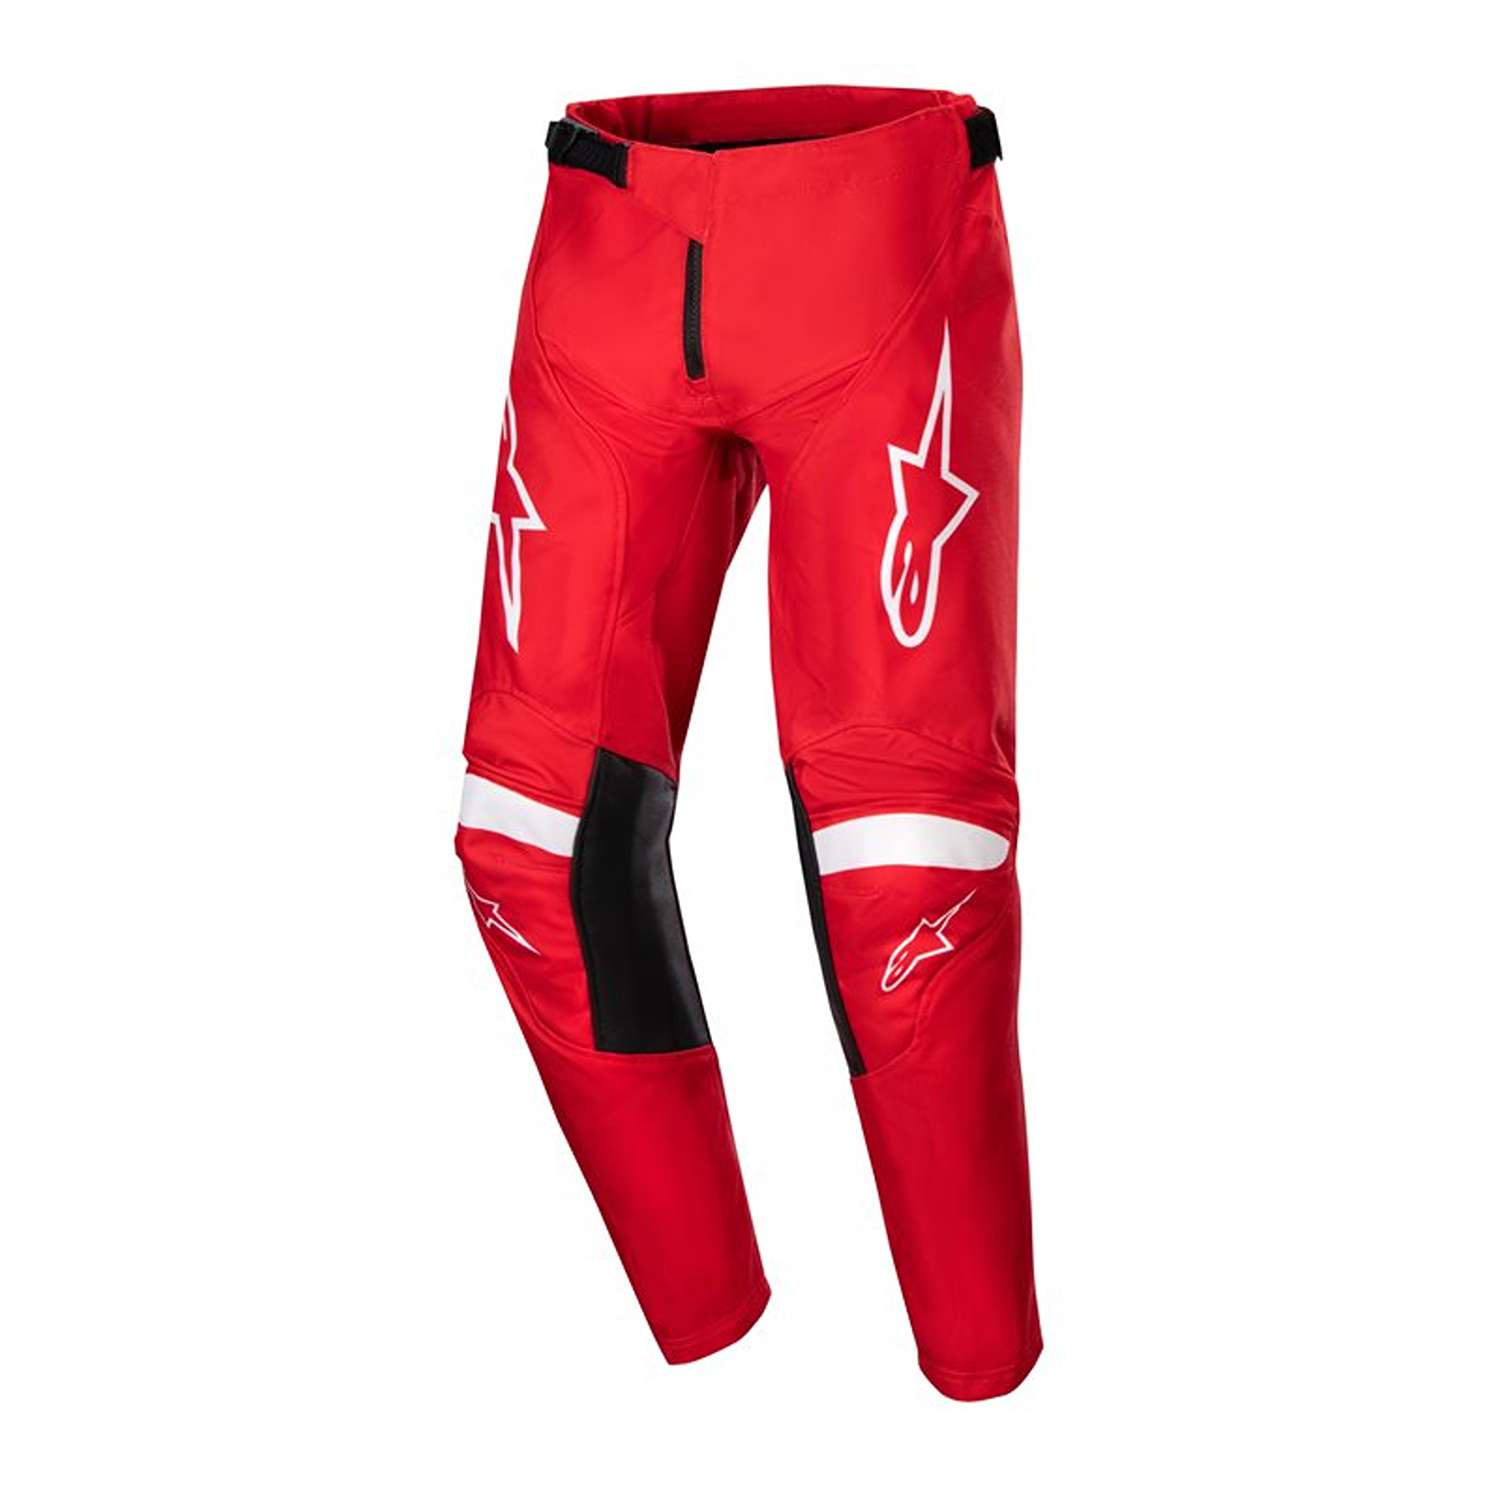 Image of Alpinestars Youth Racer Lurv Pants Mars Red White Size 22 ID 8059347267548